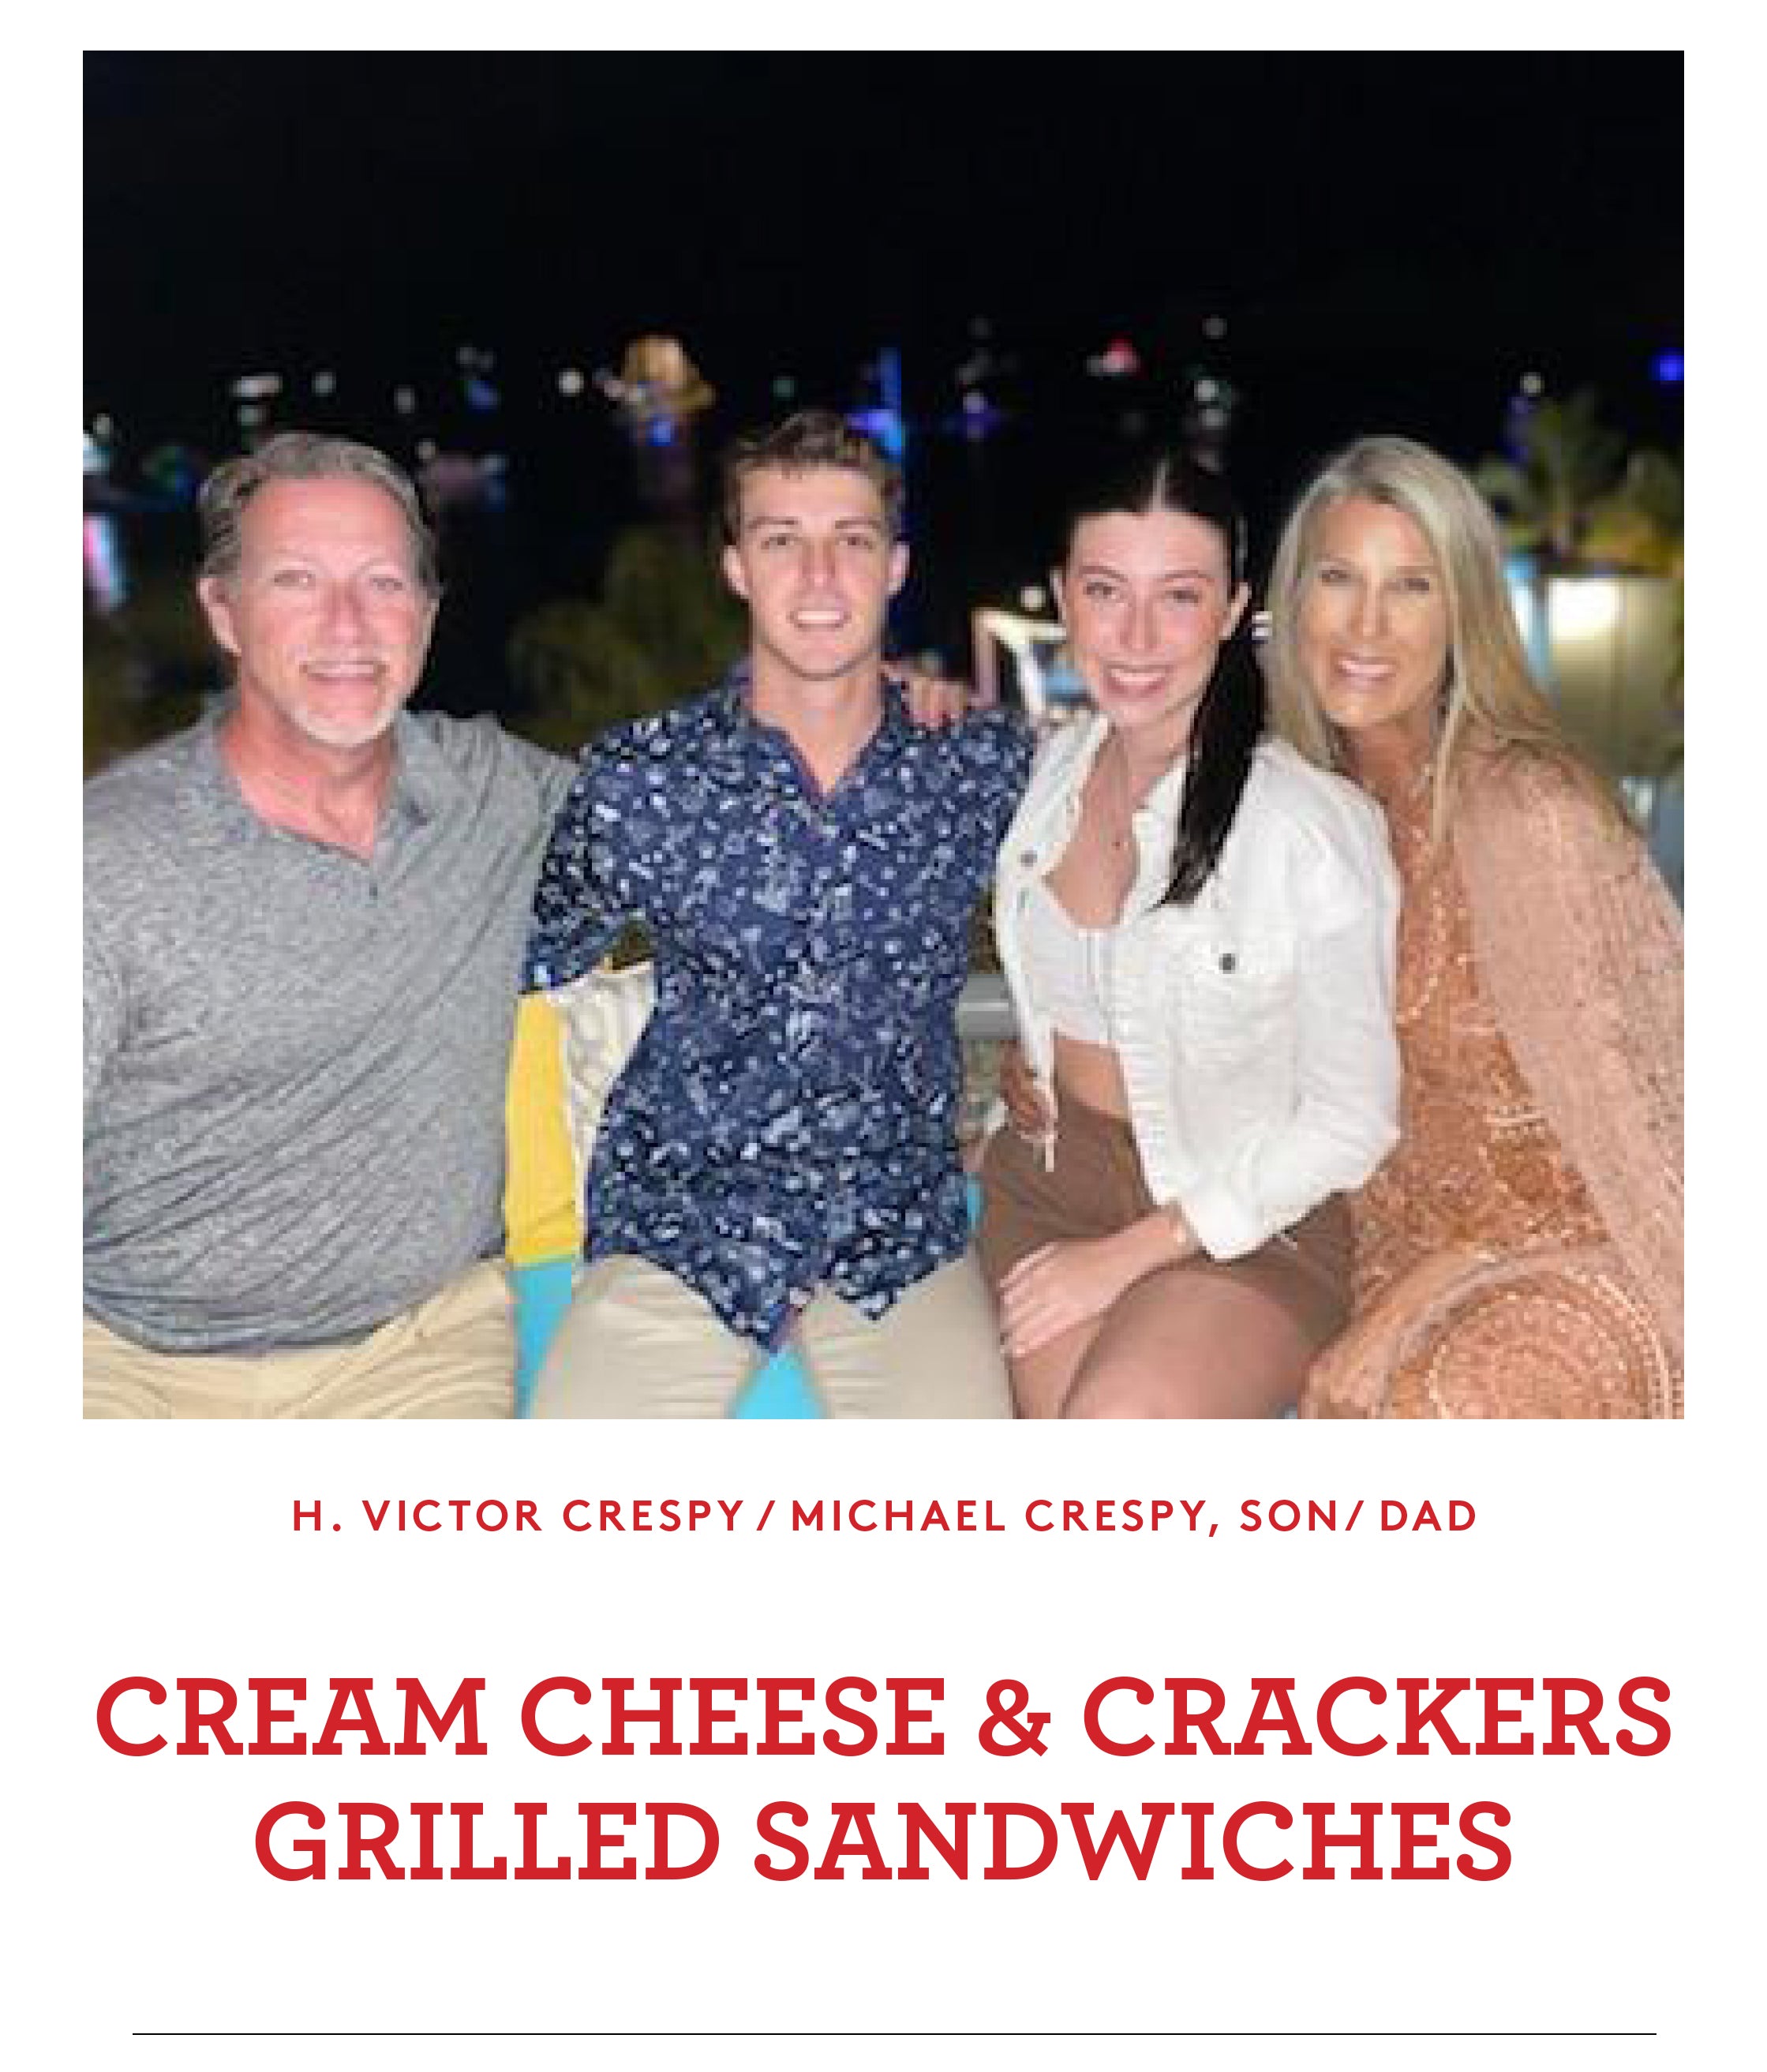 CRESPY'S GRILLED CHEESE & CRACKERS SANDWICHES